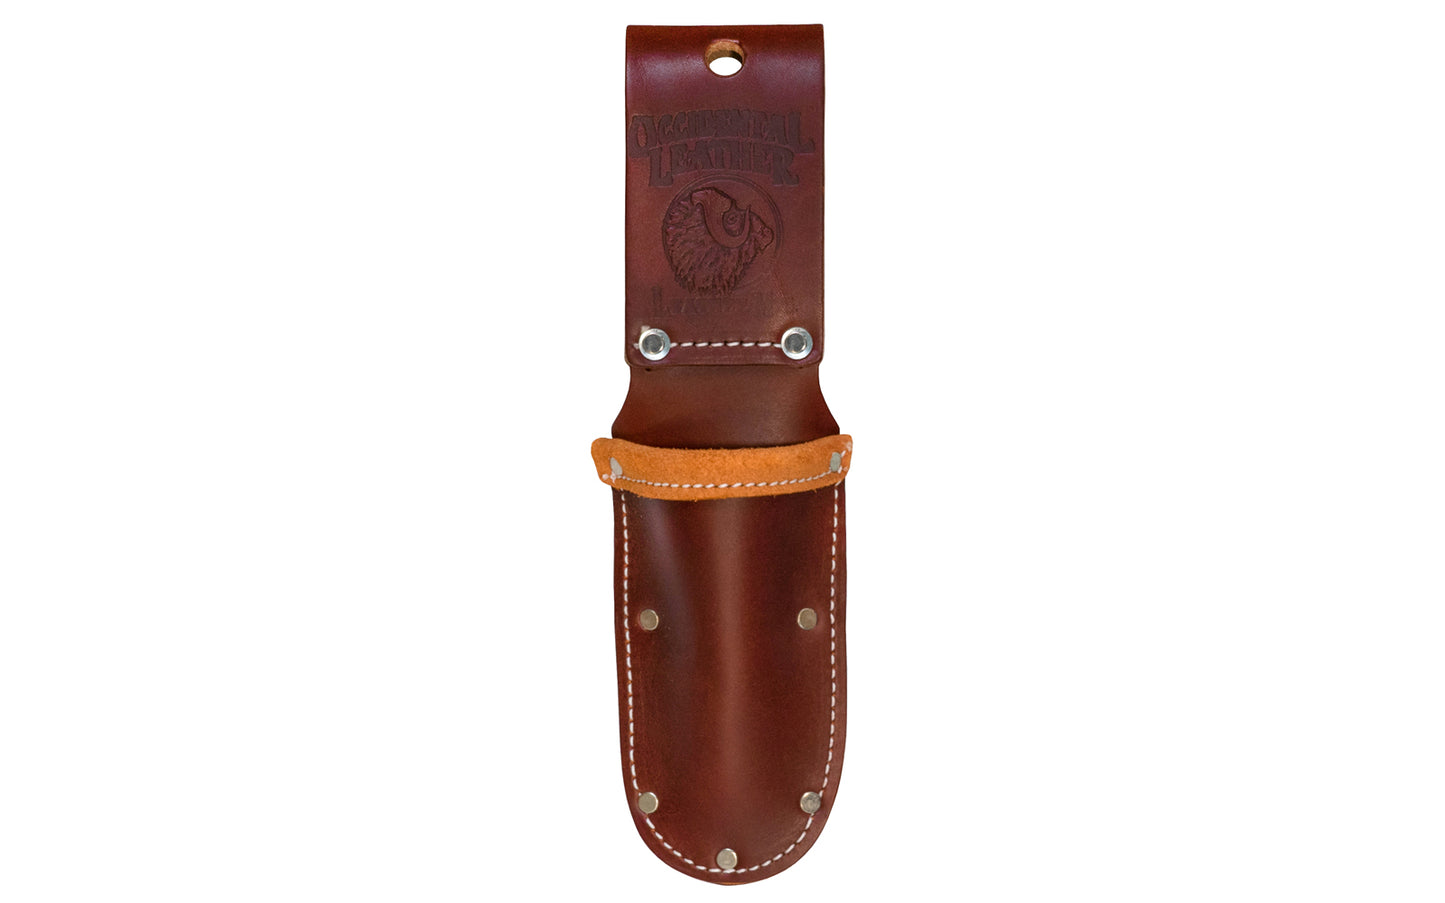 Occidental Leather Shear Holder - Model 5013 - Fits up to a 3" work belt - Leather Tool Holster - Riveted Hand Made - 759244006100 - Occidental Leather shear & tool holder holster with a closed bottom. Designed to accommodate most pliers & side cutters. Ideal for Felco & other pruning shears. Fits up to a 3" belt.